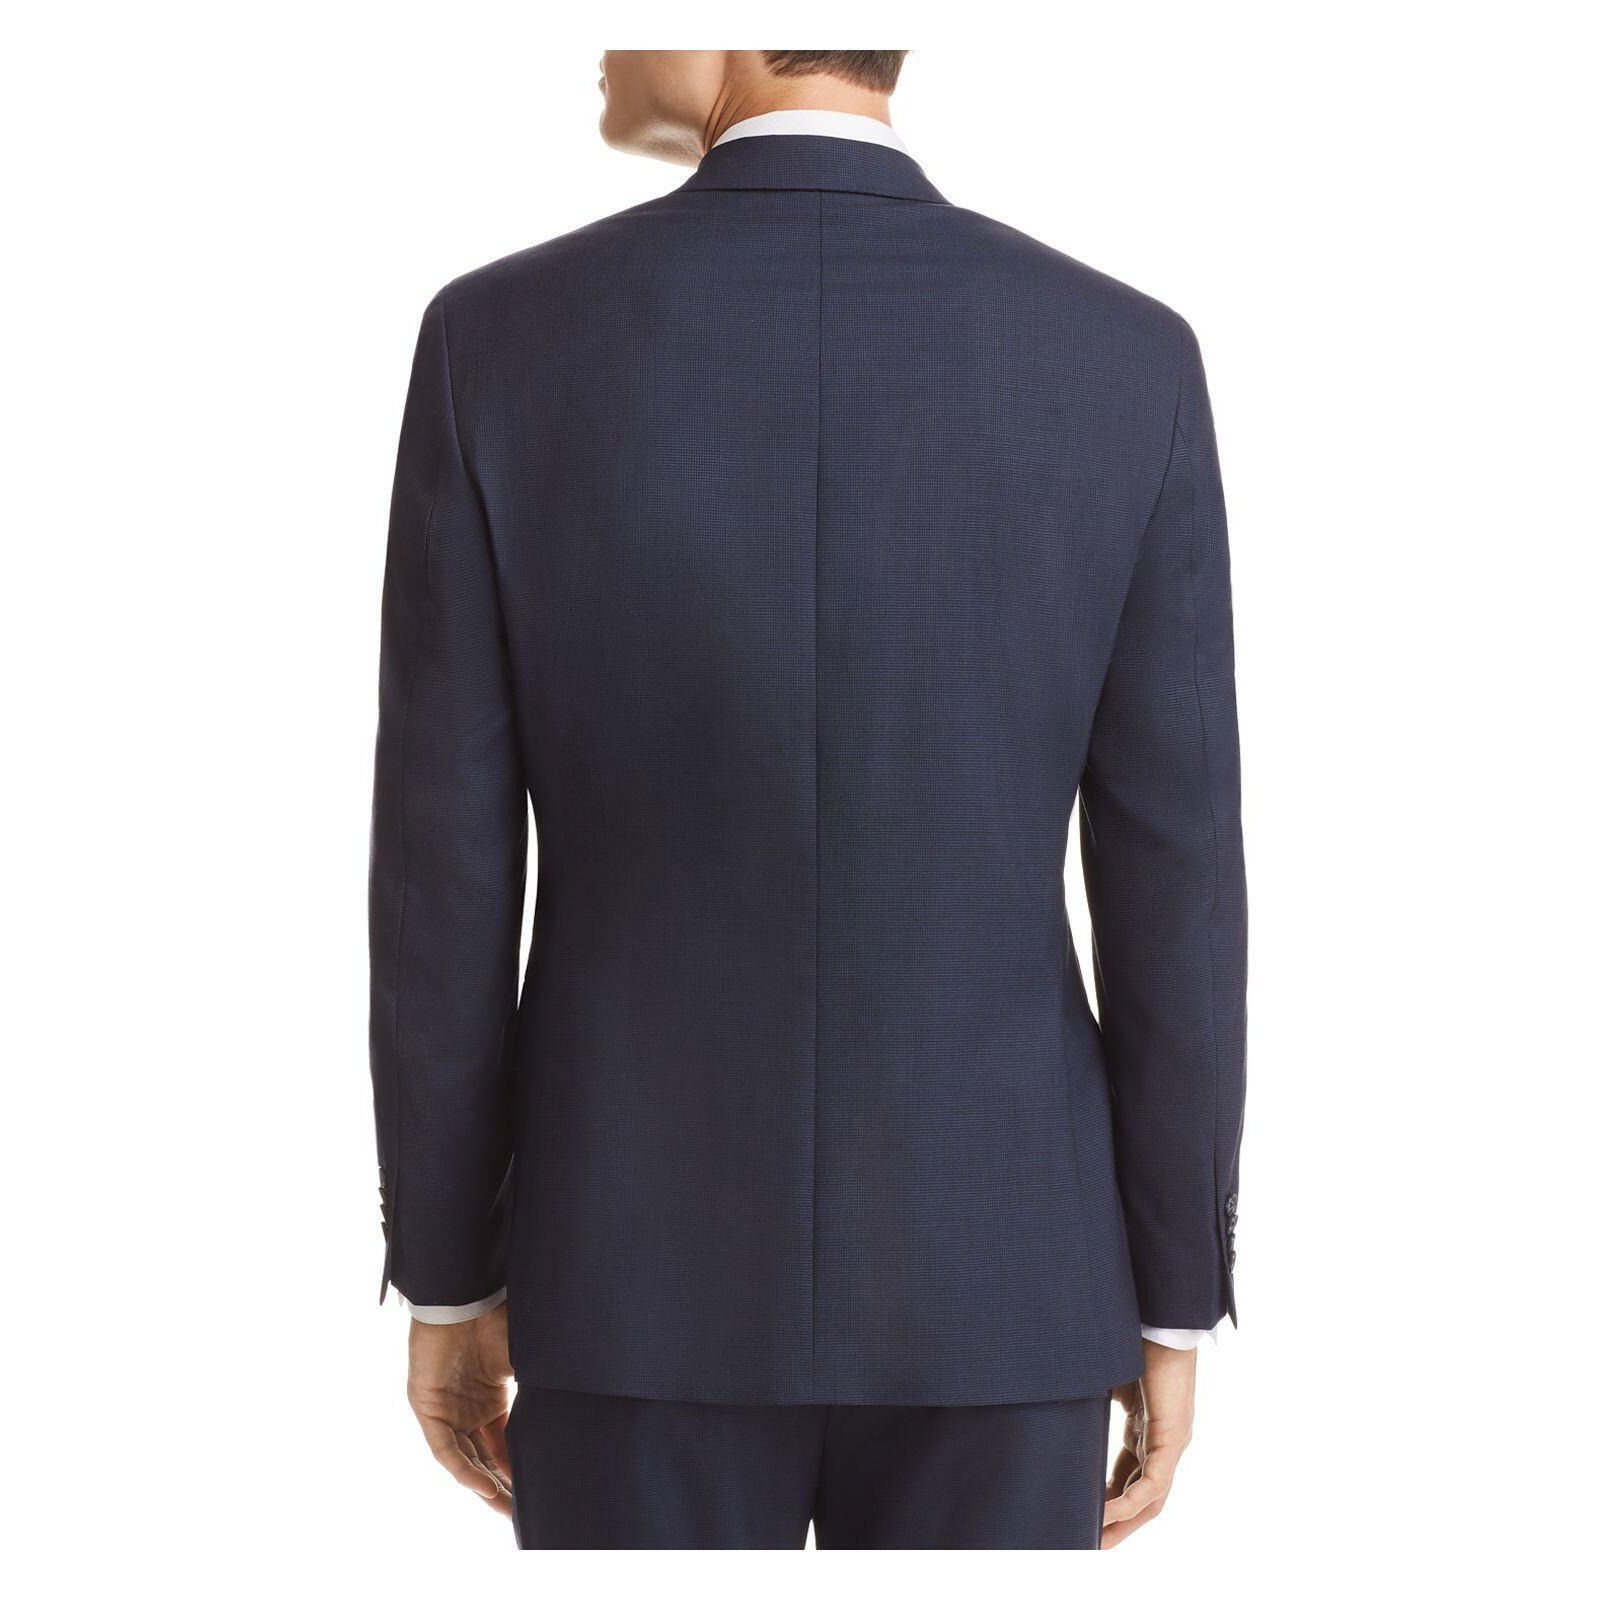 MICHAEL KORS Mens Navy Single Breasted, Stretch, Classic Fit Wool Blend Suit Separate Blazer Jacket 38R alternate image